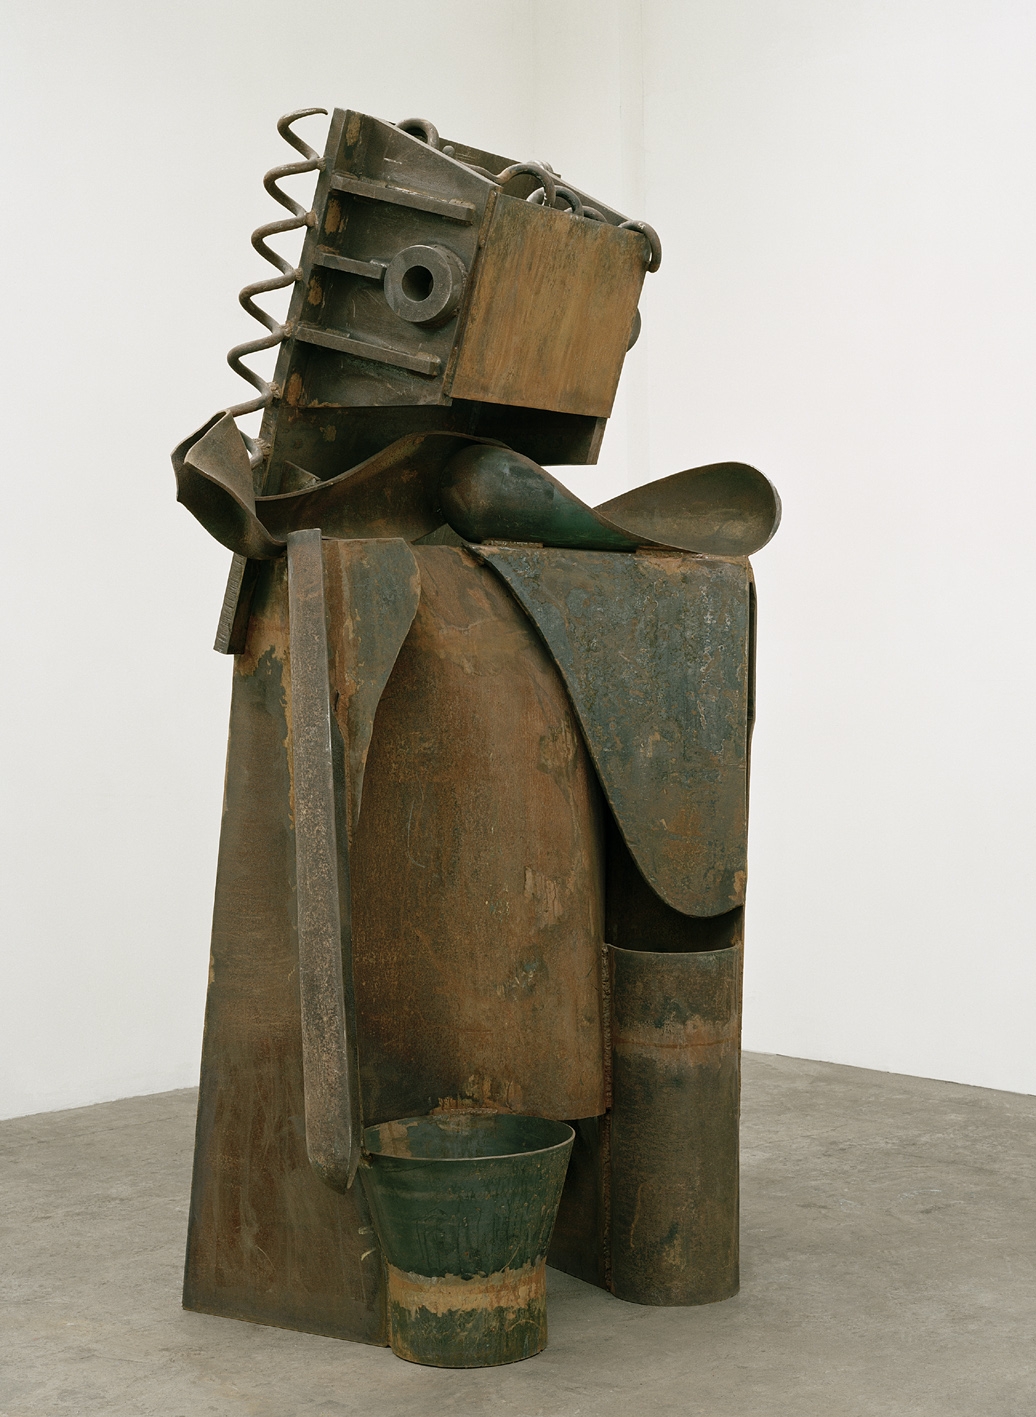 Anthony Caro: Upright Sculptures, Annely Juda | The Arts Desk